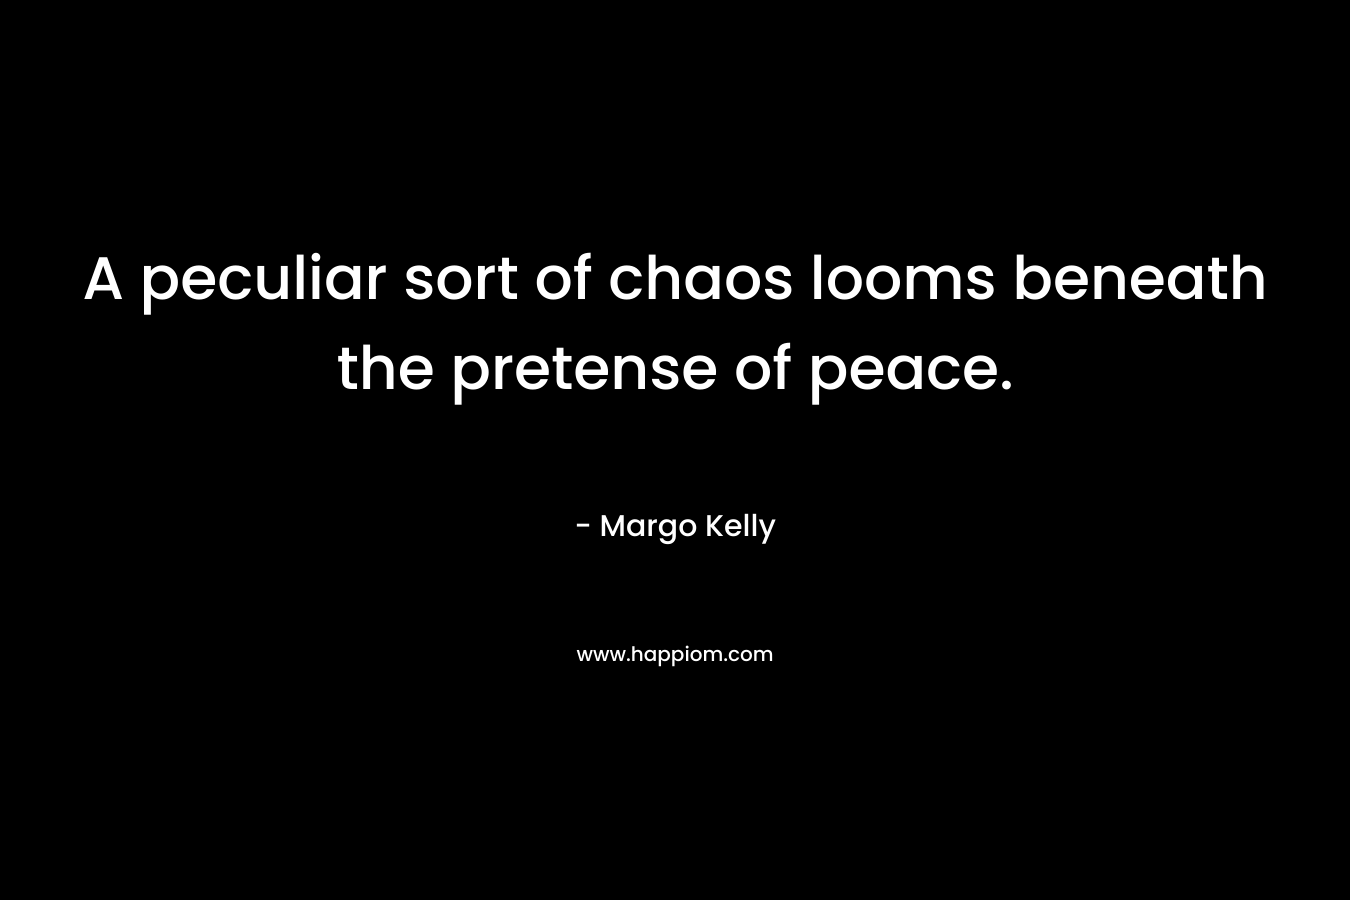 A peculiar sort of chaos looms beneath the pretense of peace. – Margo Kelly